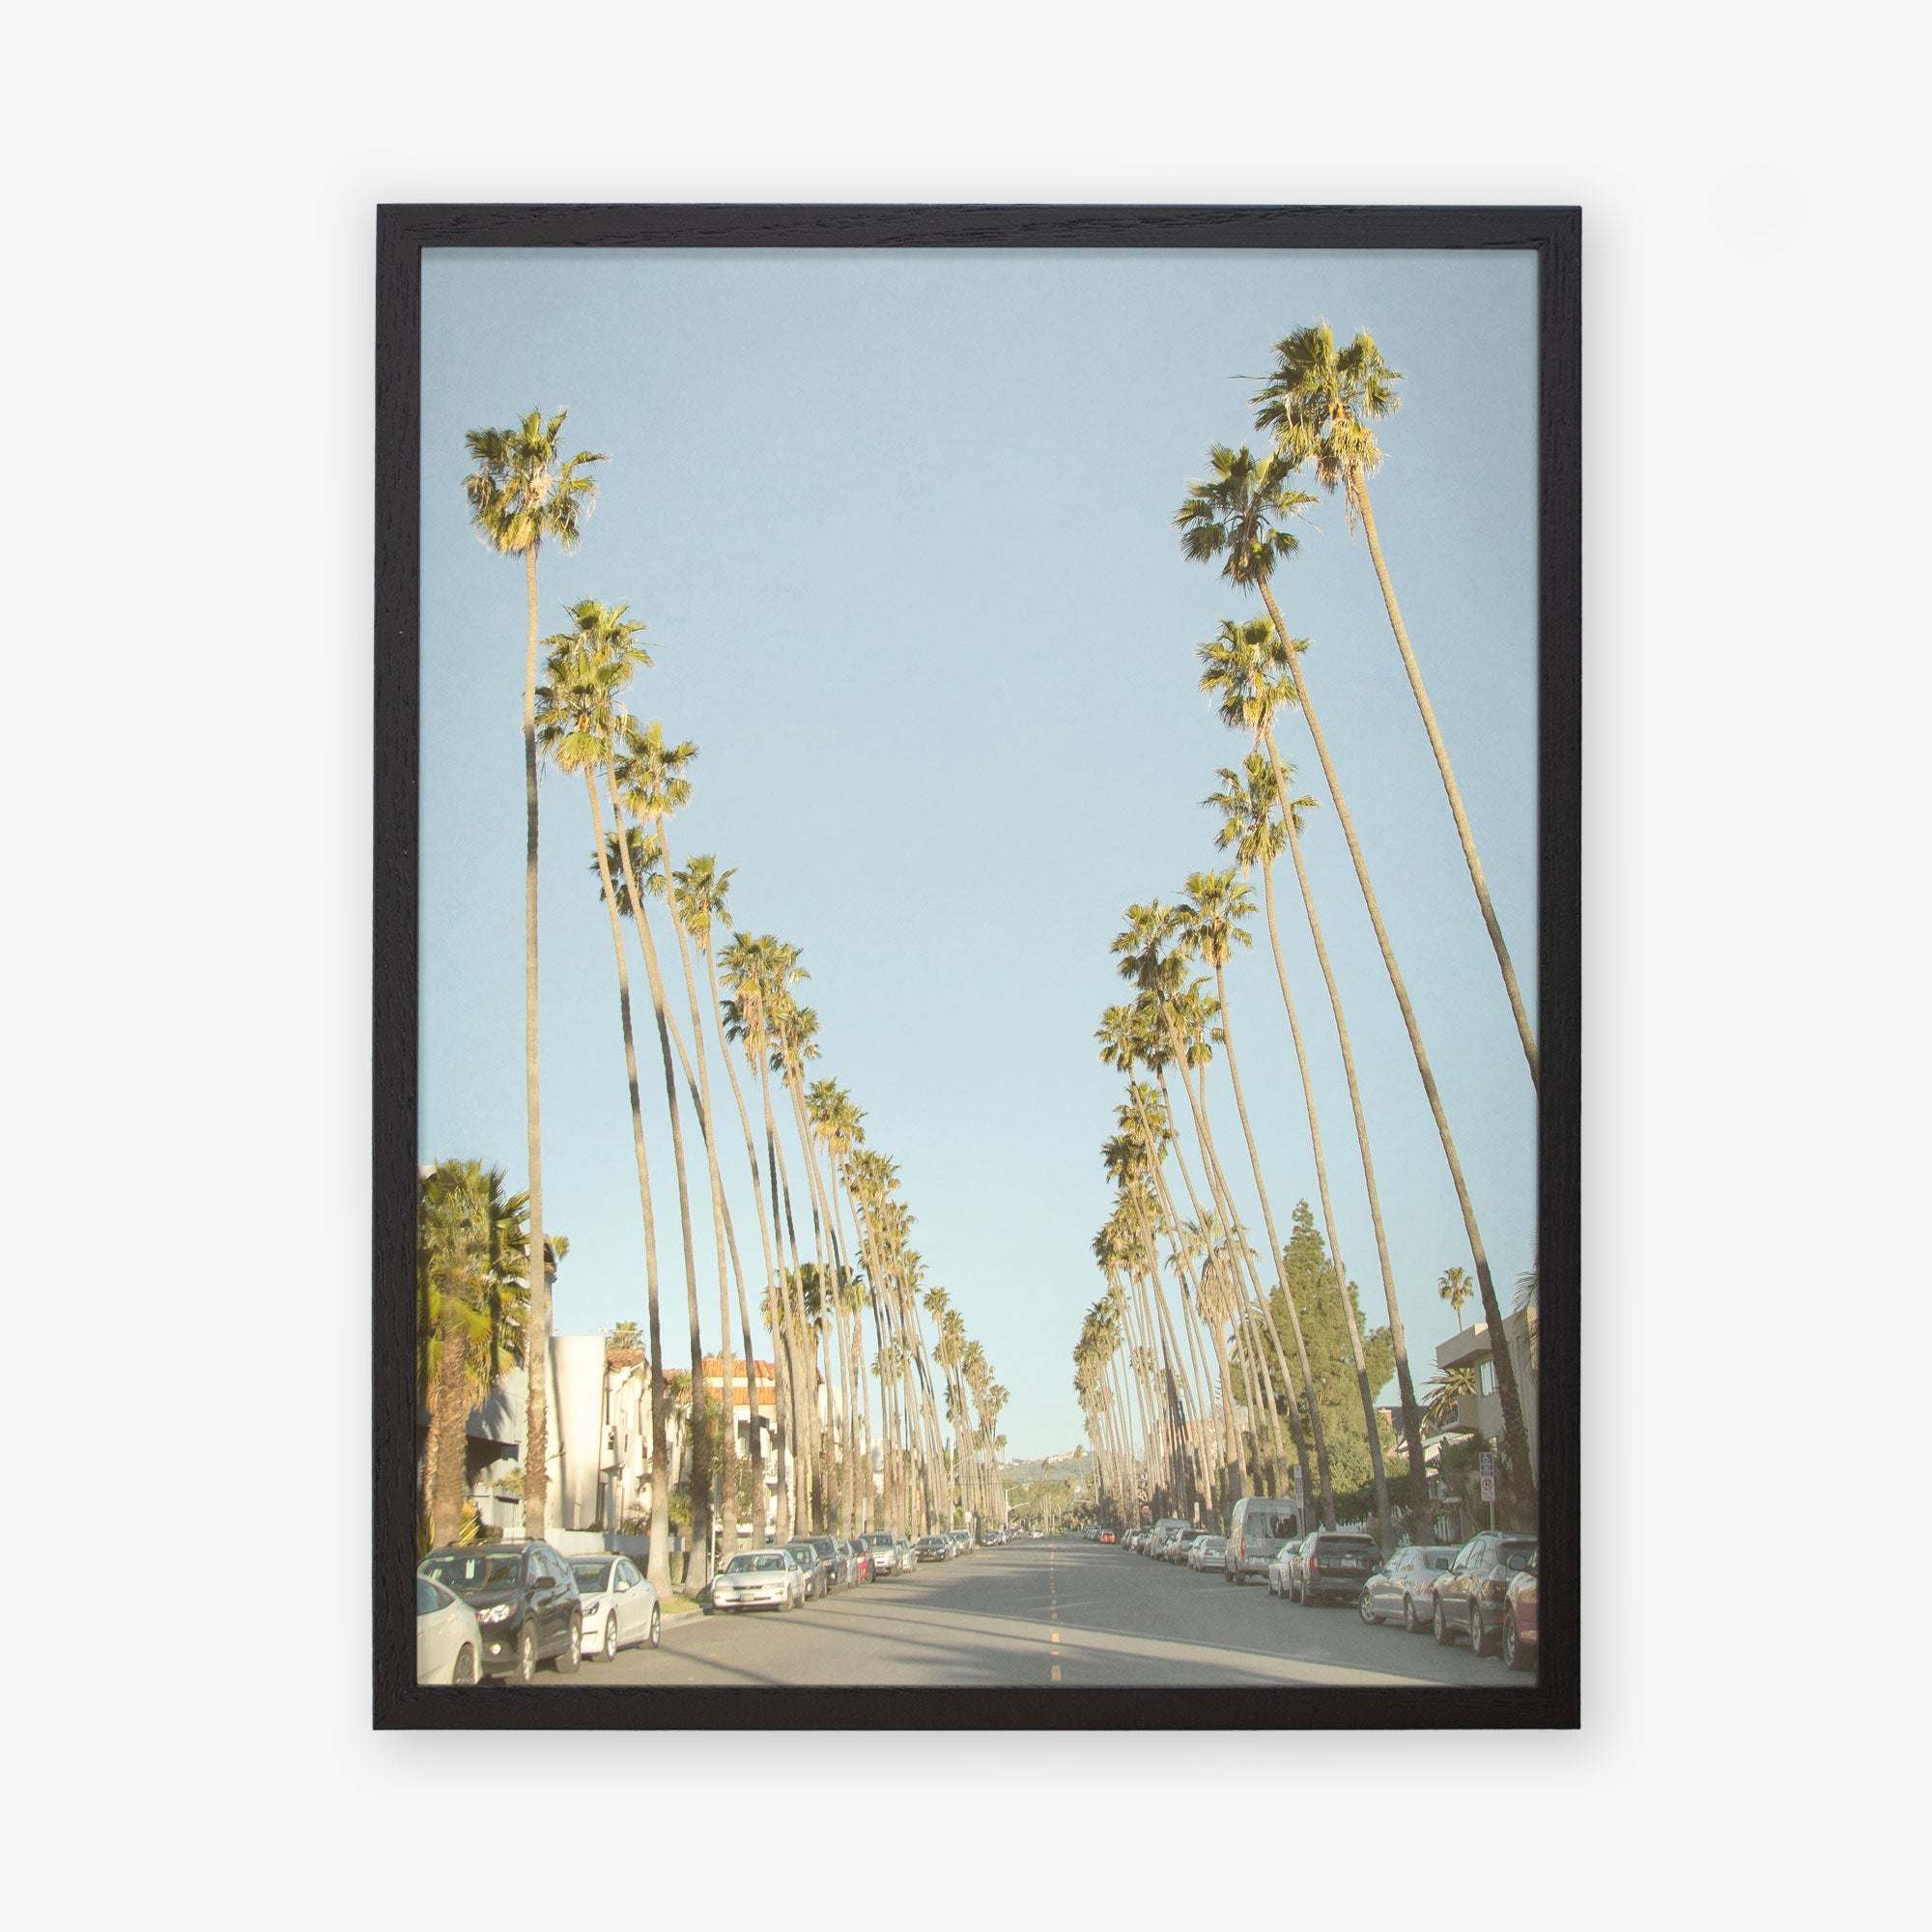 Framed photograph of a sunny street lined with tall palm trees on Sunset Boulevard, cars parked along the roadside, clear blue sky in the background: Offley Green&#39;s Los Angeles Palm Tree Lined Street &#39;Sunset Boulevard Dreams&#39;.